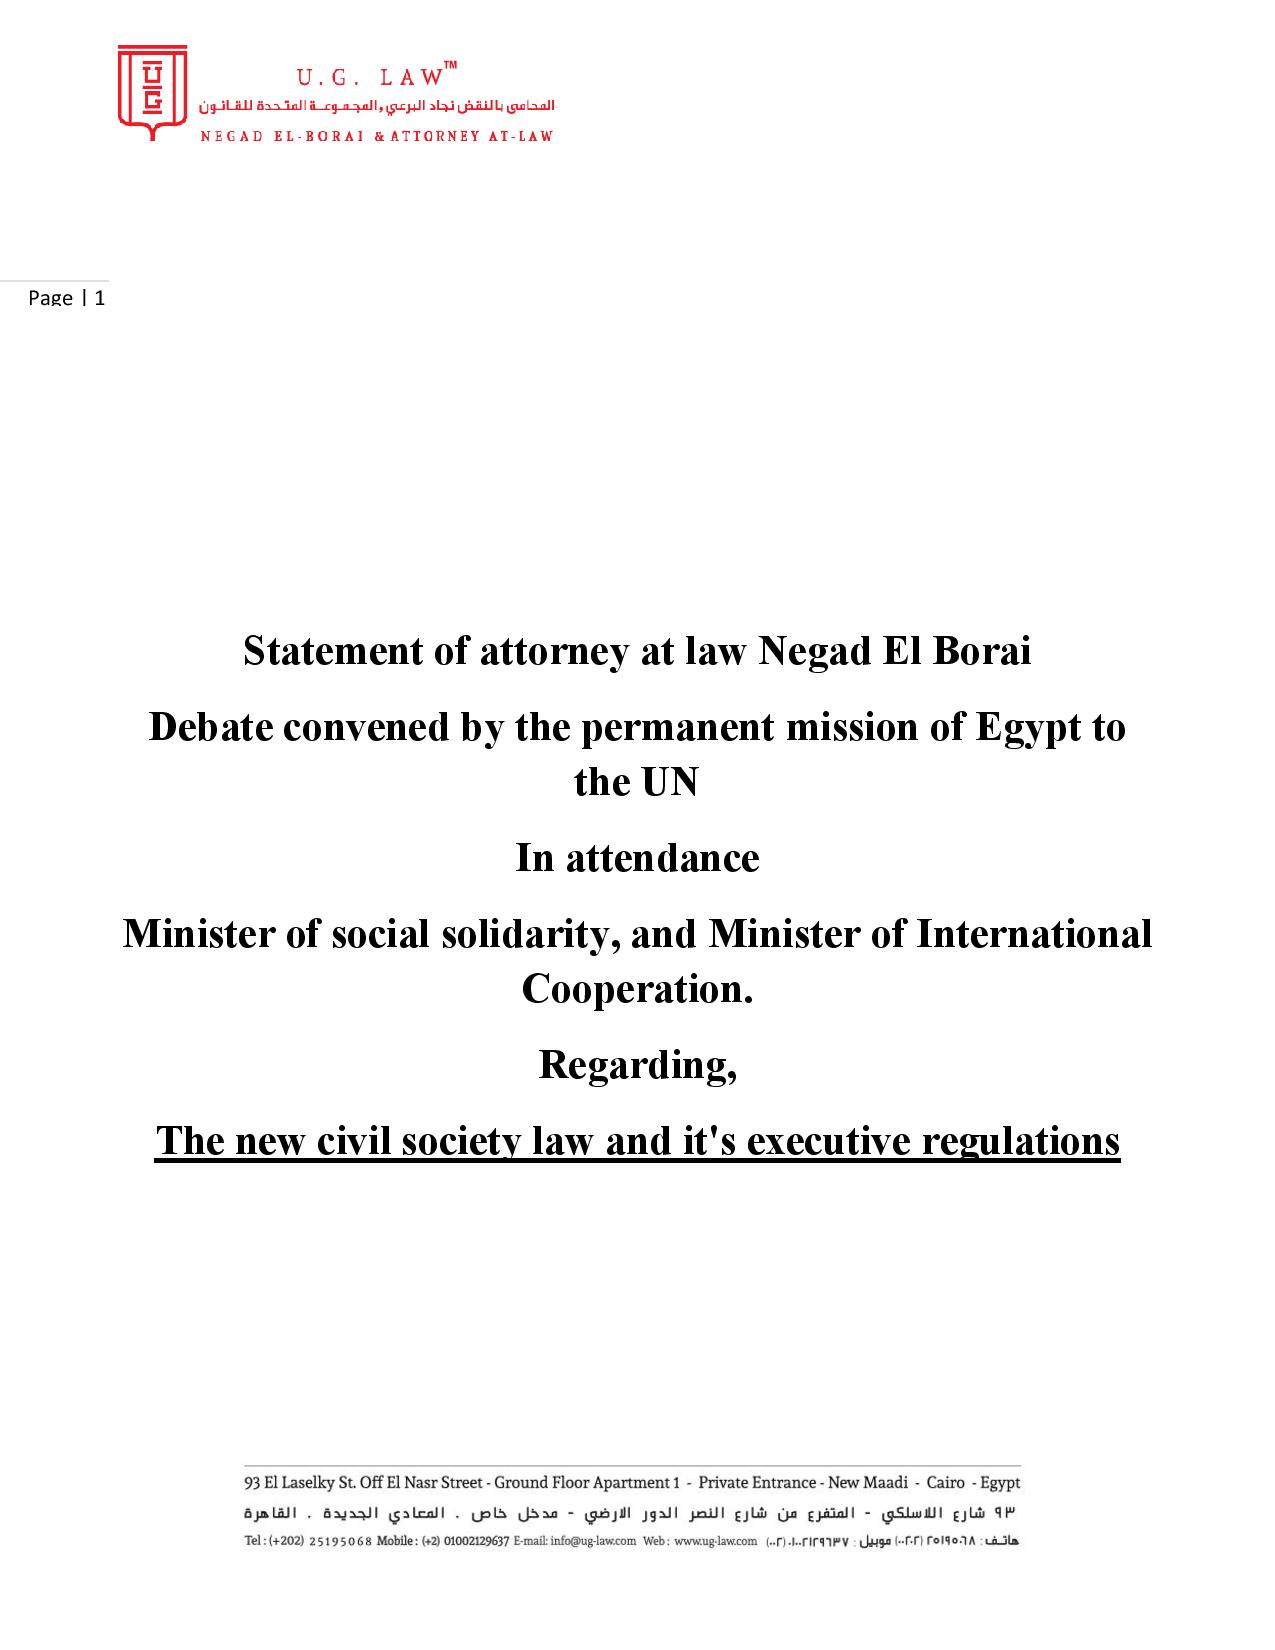 Statement of attorney at law Negad El Borai Debate convened by the permanent mission of Egypt to the UN Regarding The new civil society law and it’s executive regulations